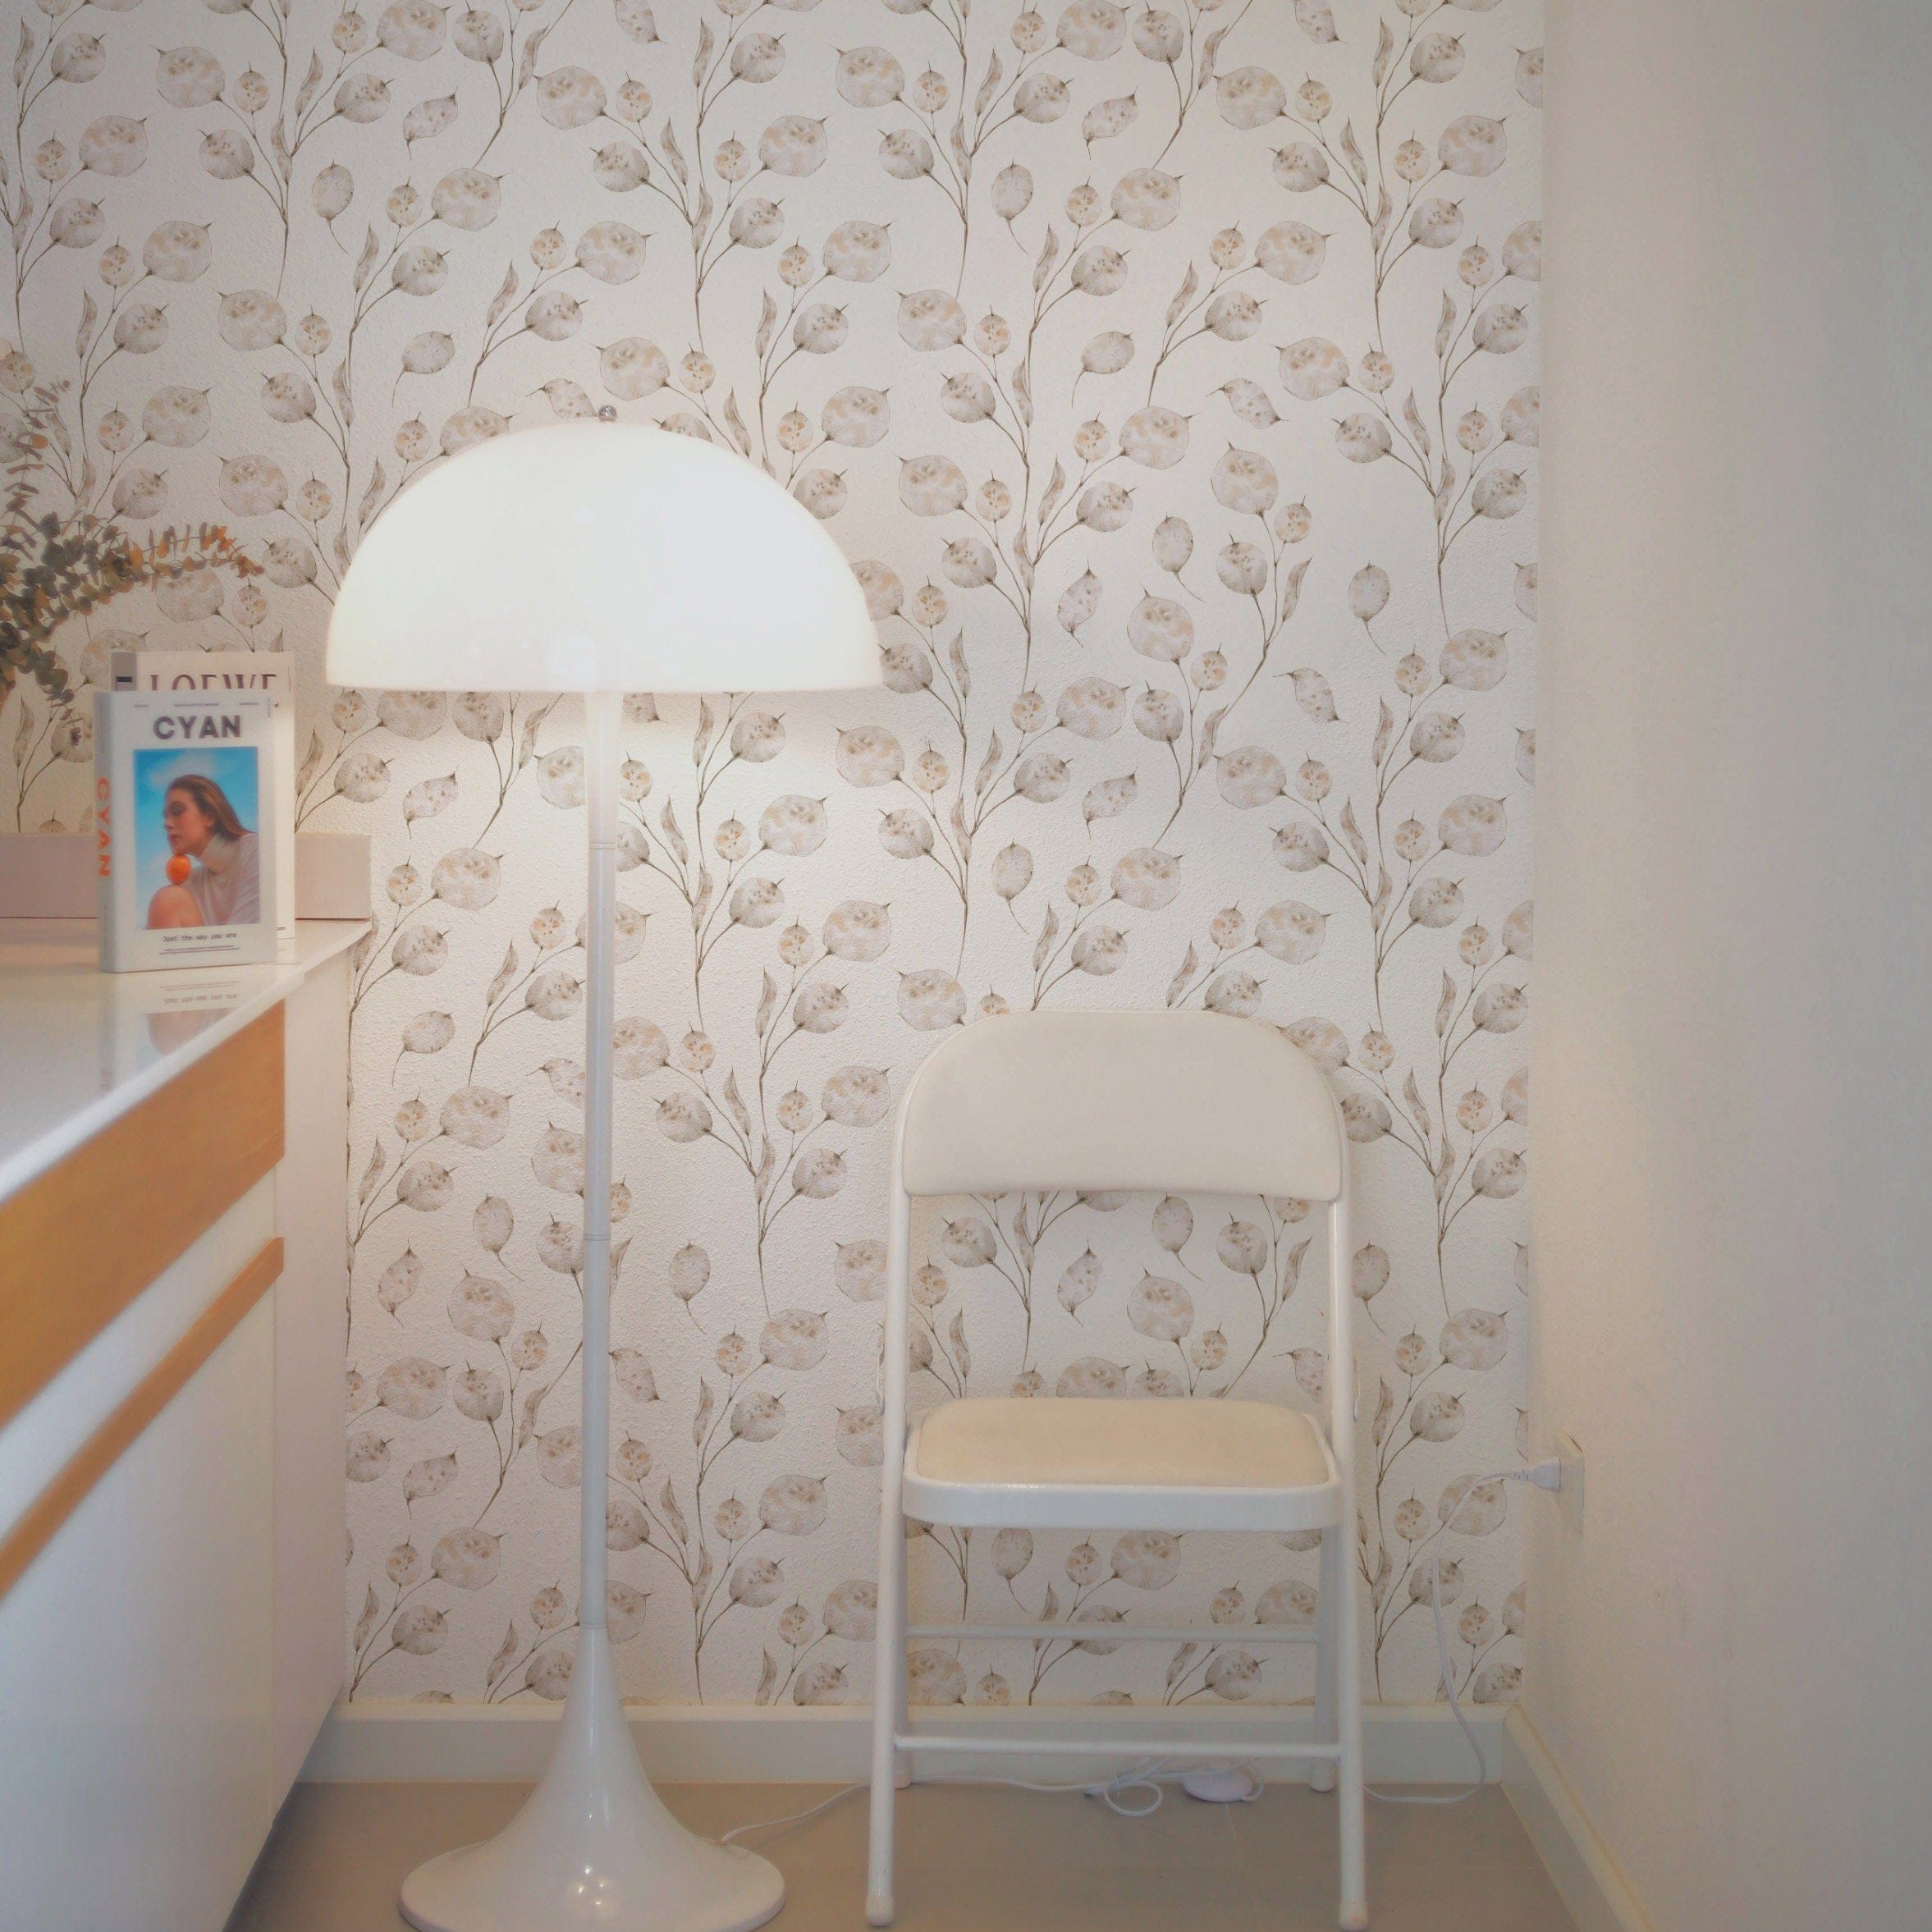 A reading nook with a white chair and lamp, set against a wall decorated with Winter Branches Wallpaper featuring beige botanical designs, creating a serene and stylish atmosphere.